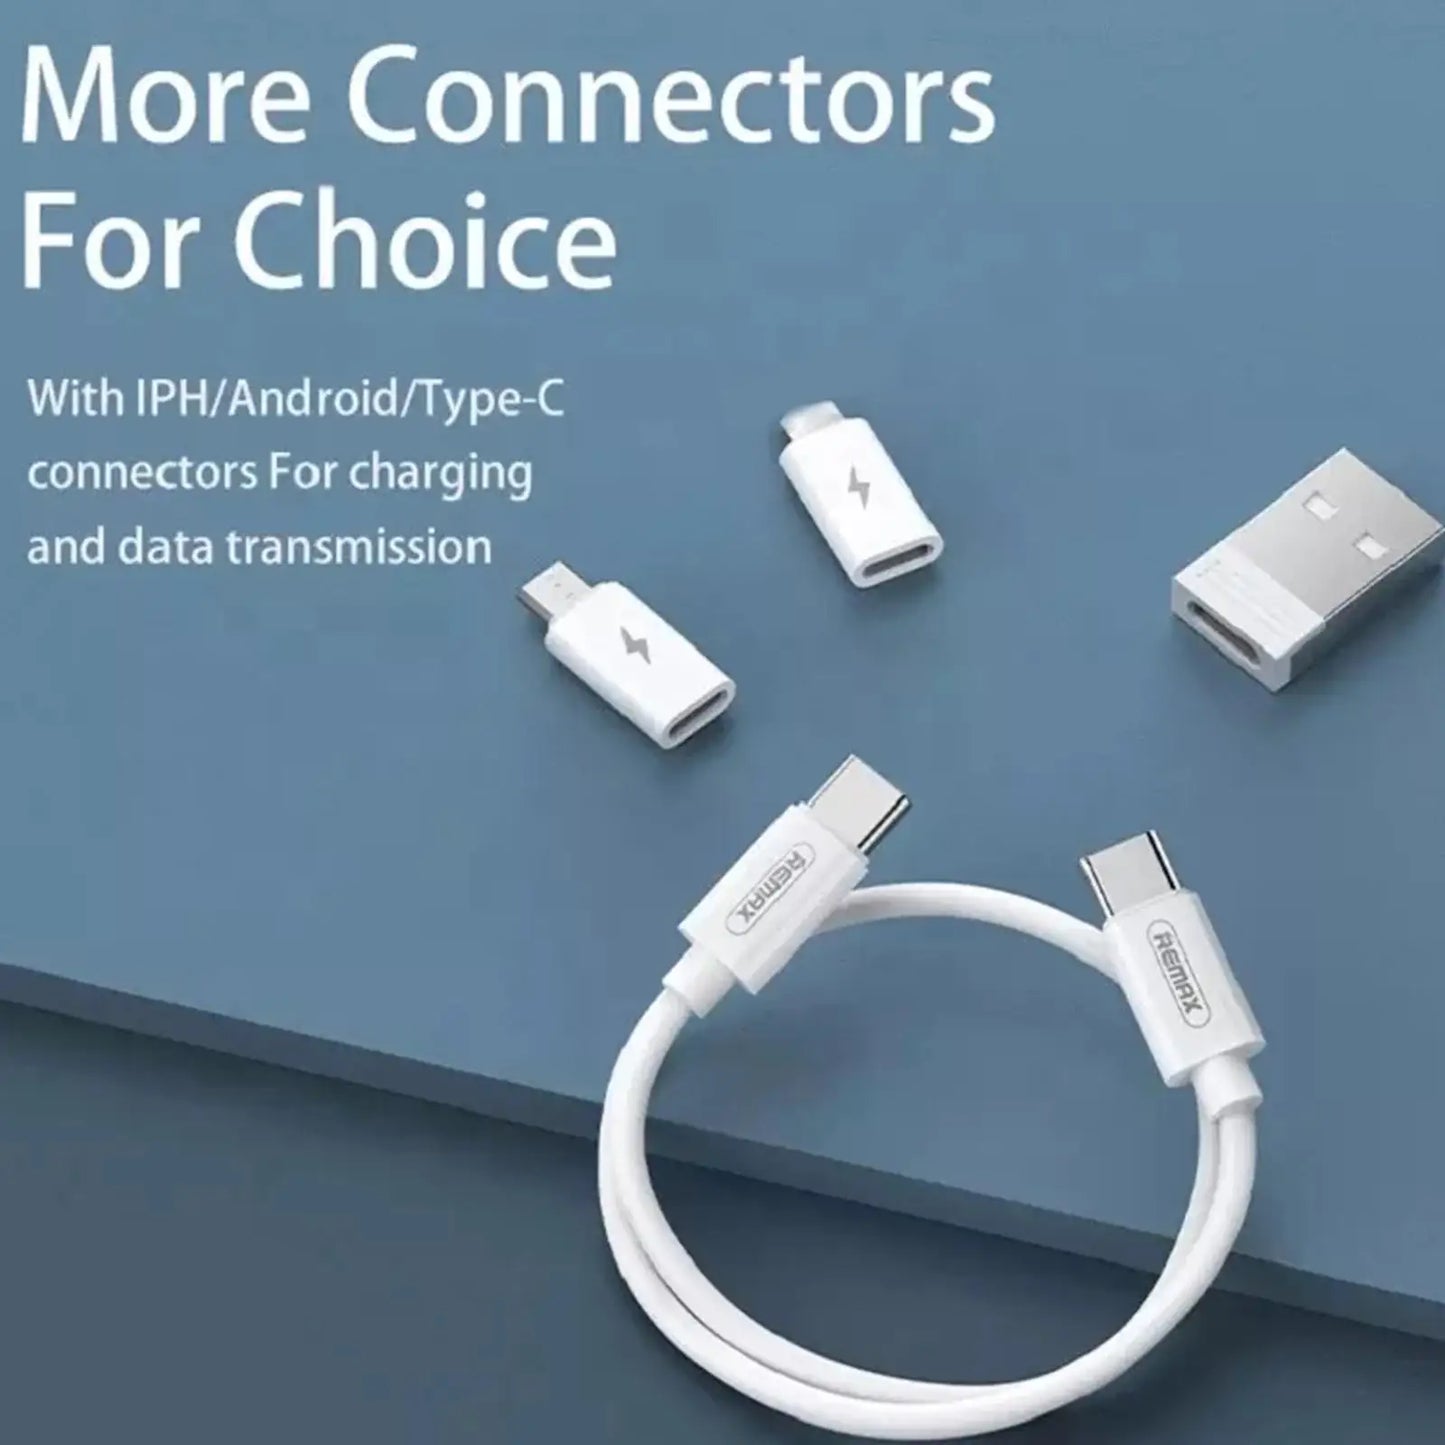 Multifunctional 60W Type C Data Cable Set Fast Charge for Iphone Chargers Storage Box Card Pin Travel Box Phone Holder